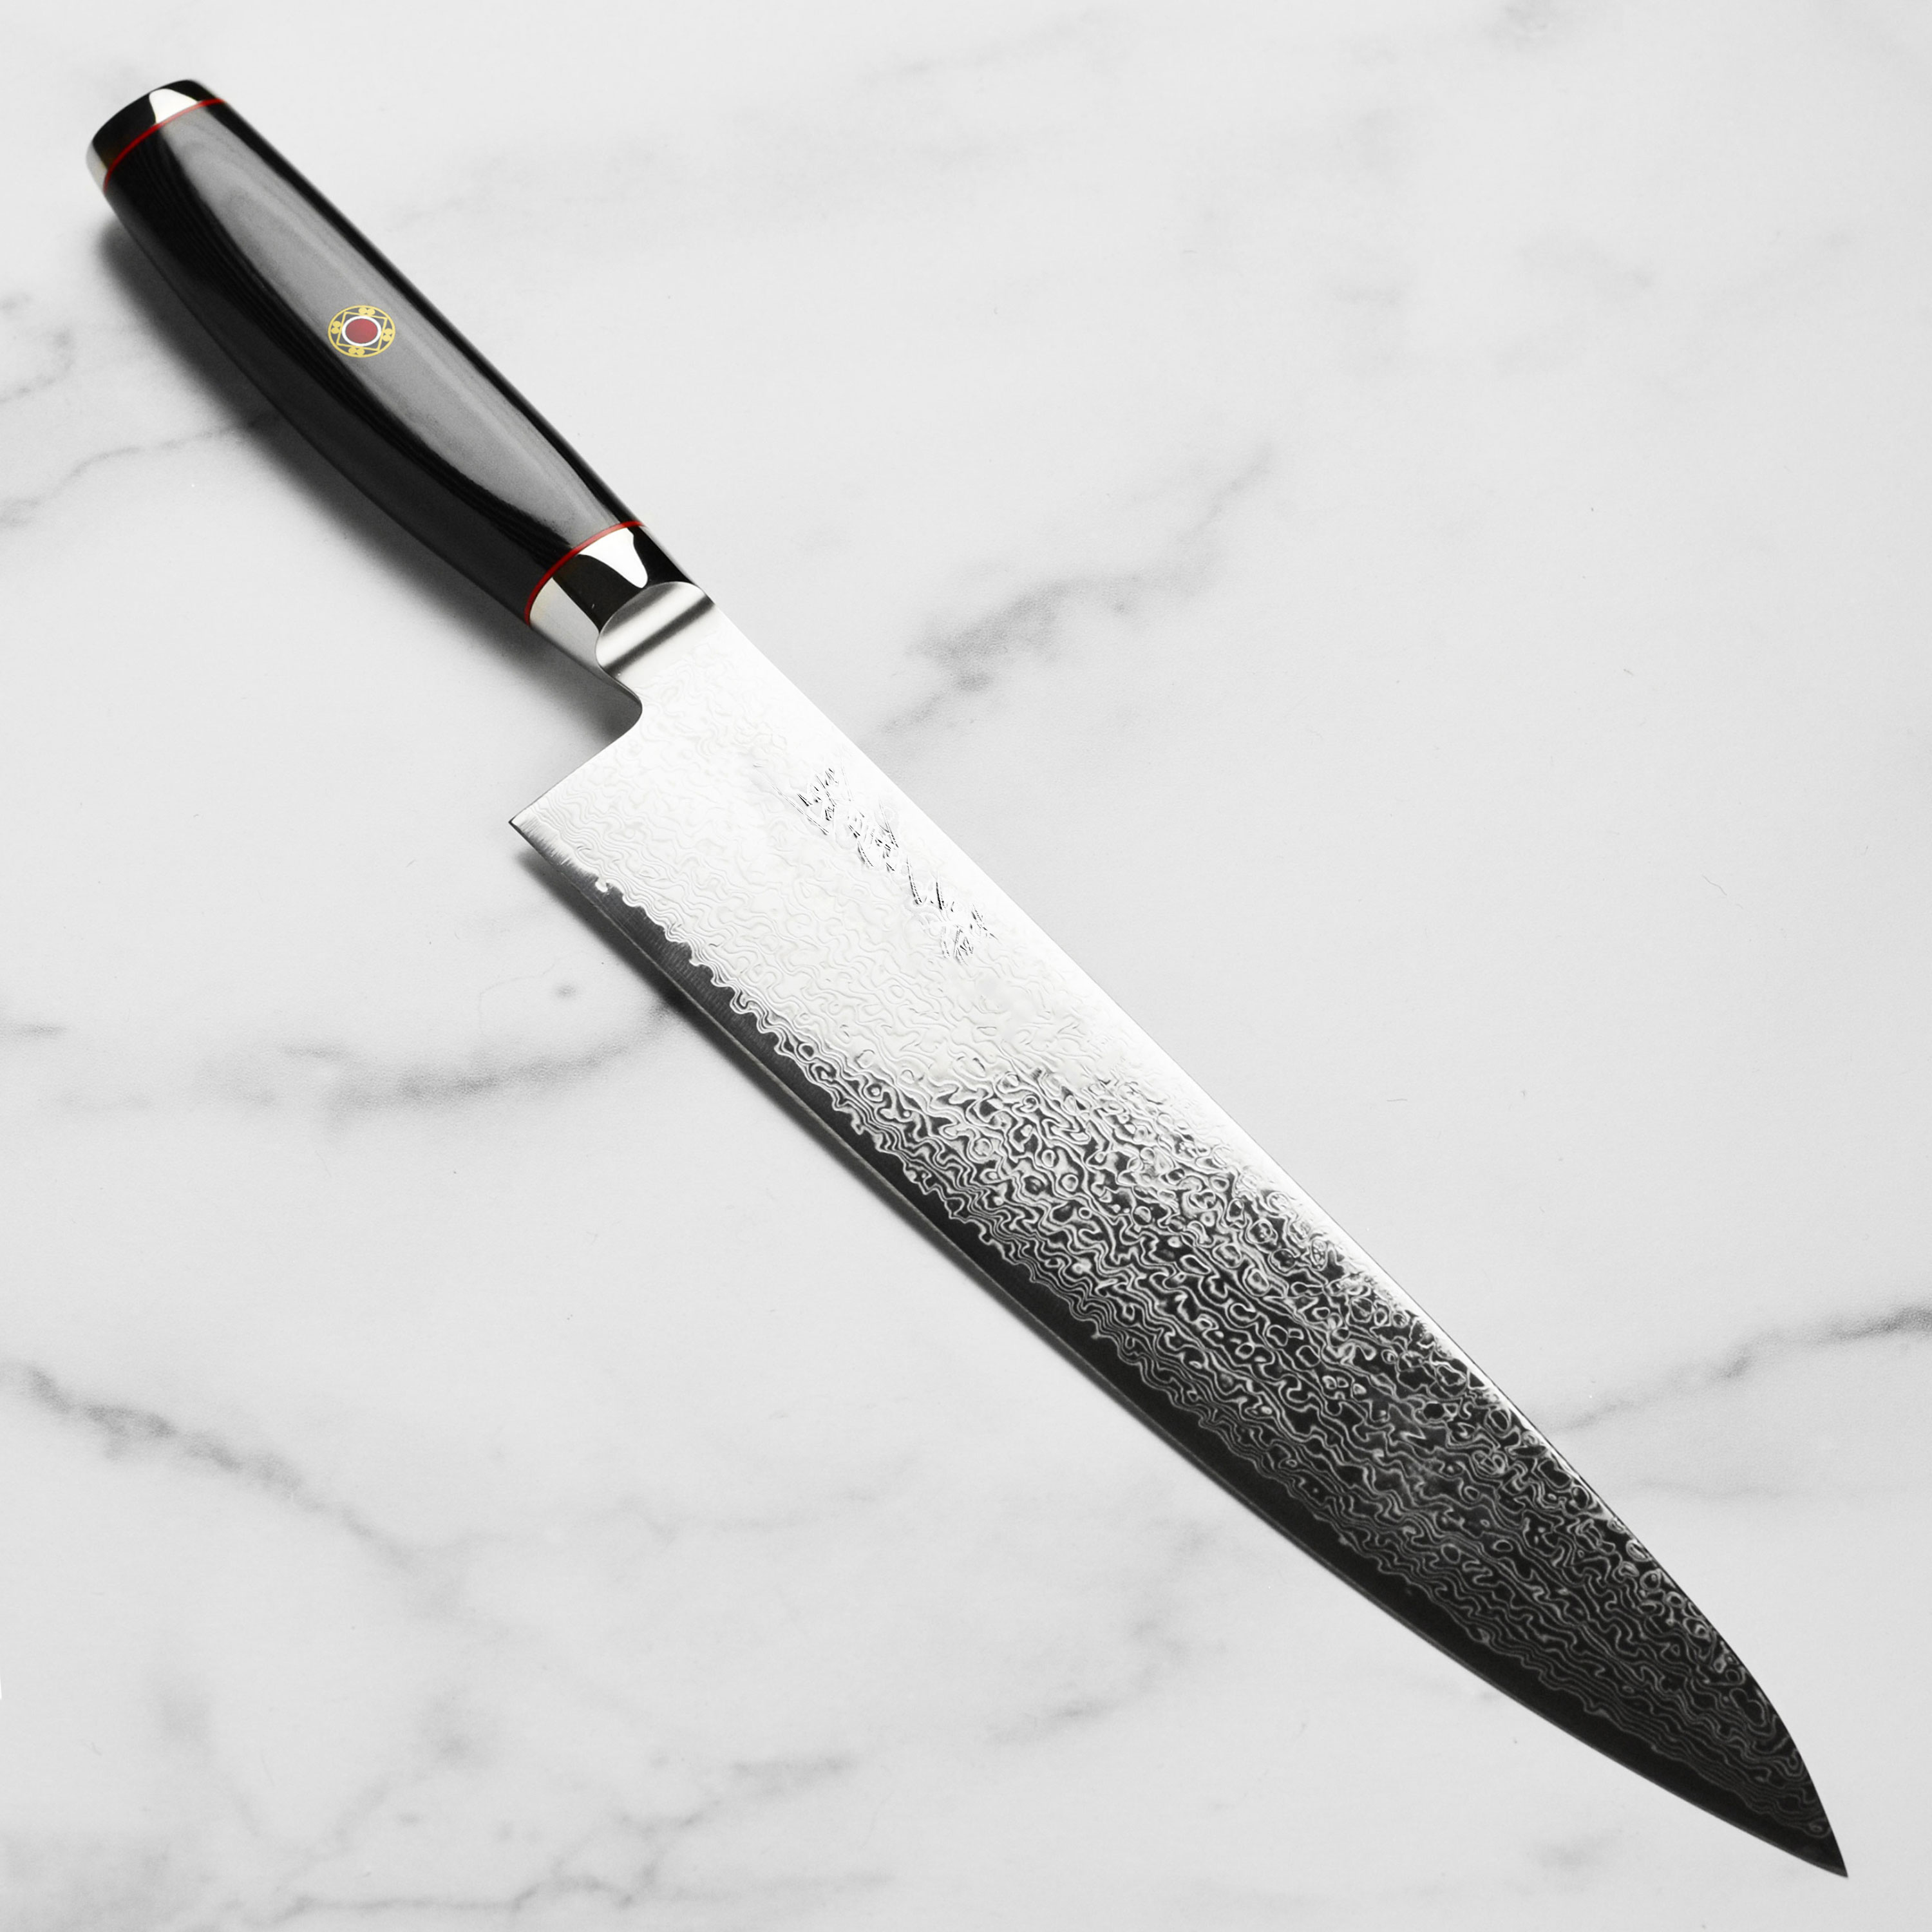 Cutlery and More Japanese Knife Sale: 8" Yaxell Mon Chef's Knife w/ Hollow Edge $60 & More + Free Shipping